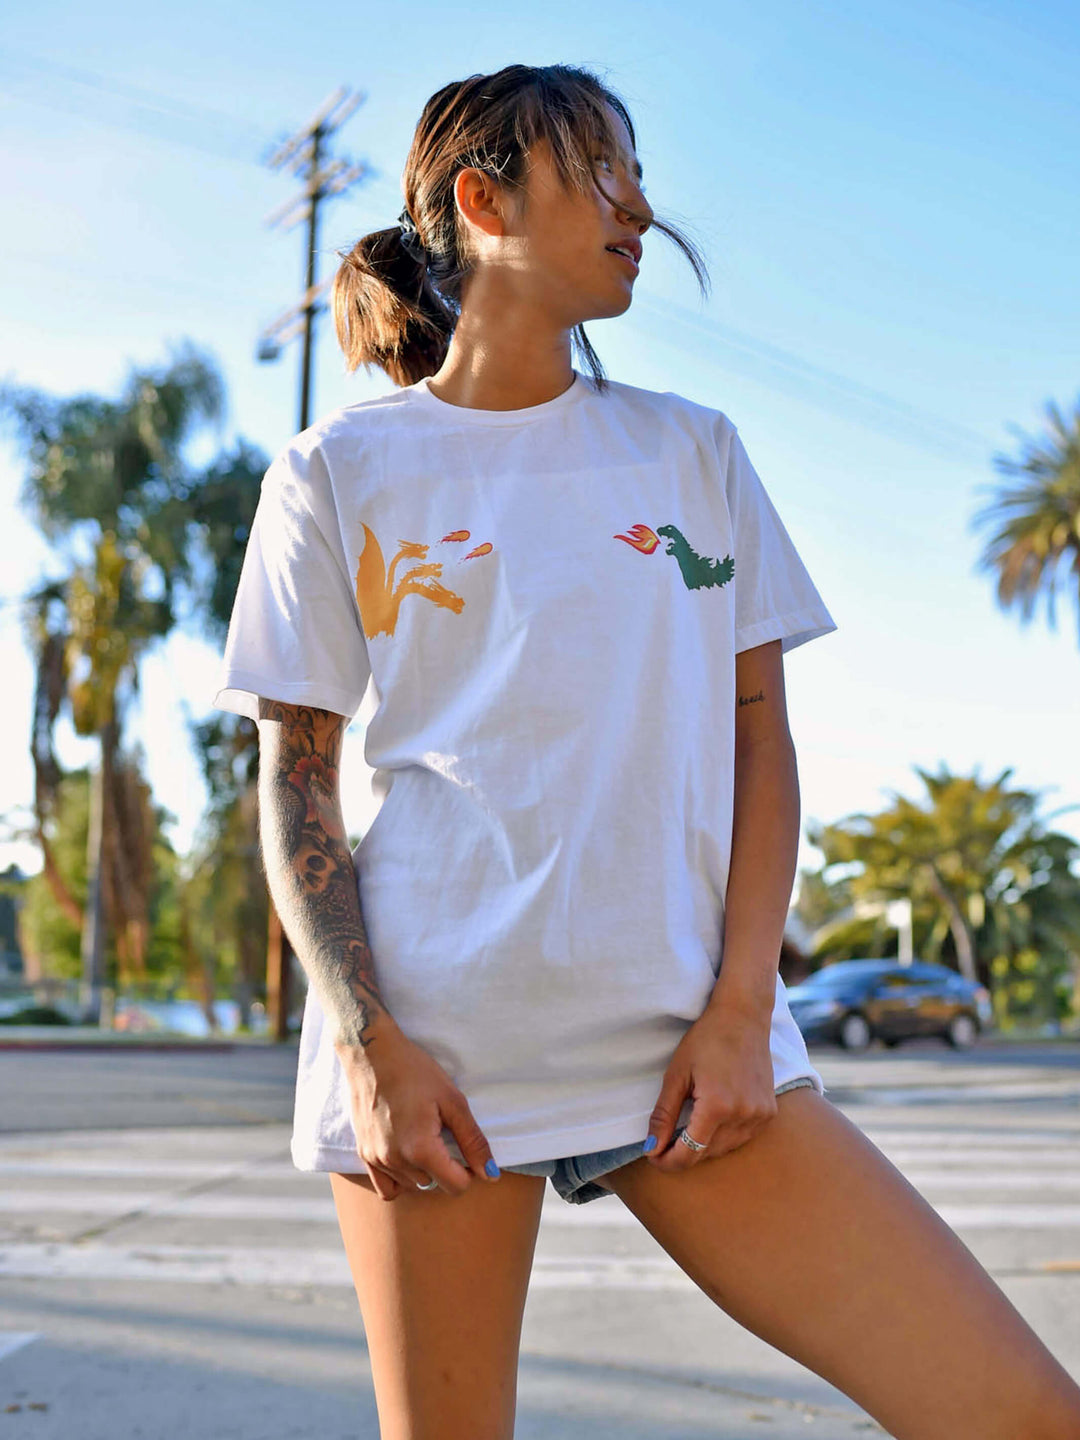 A model wearing a white tee with two kaijus Godzilla and King Ghidorah battling on it.